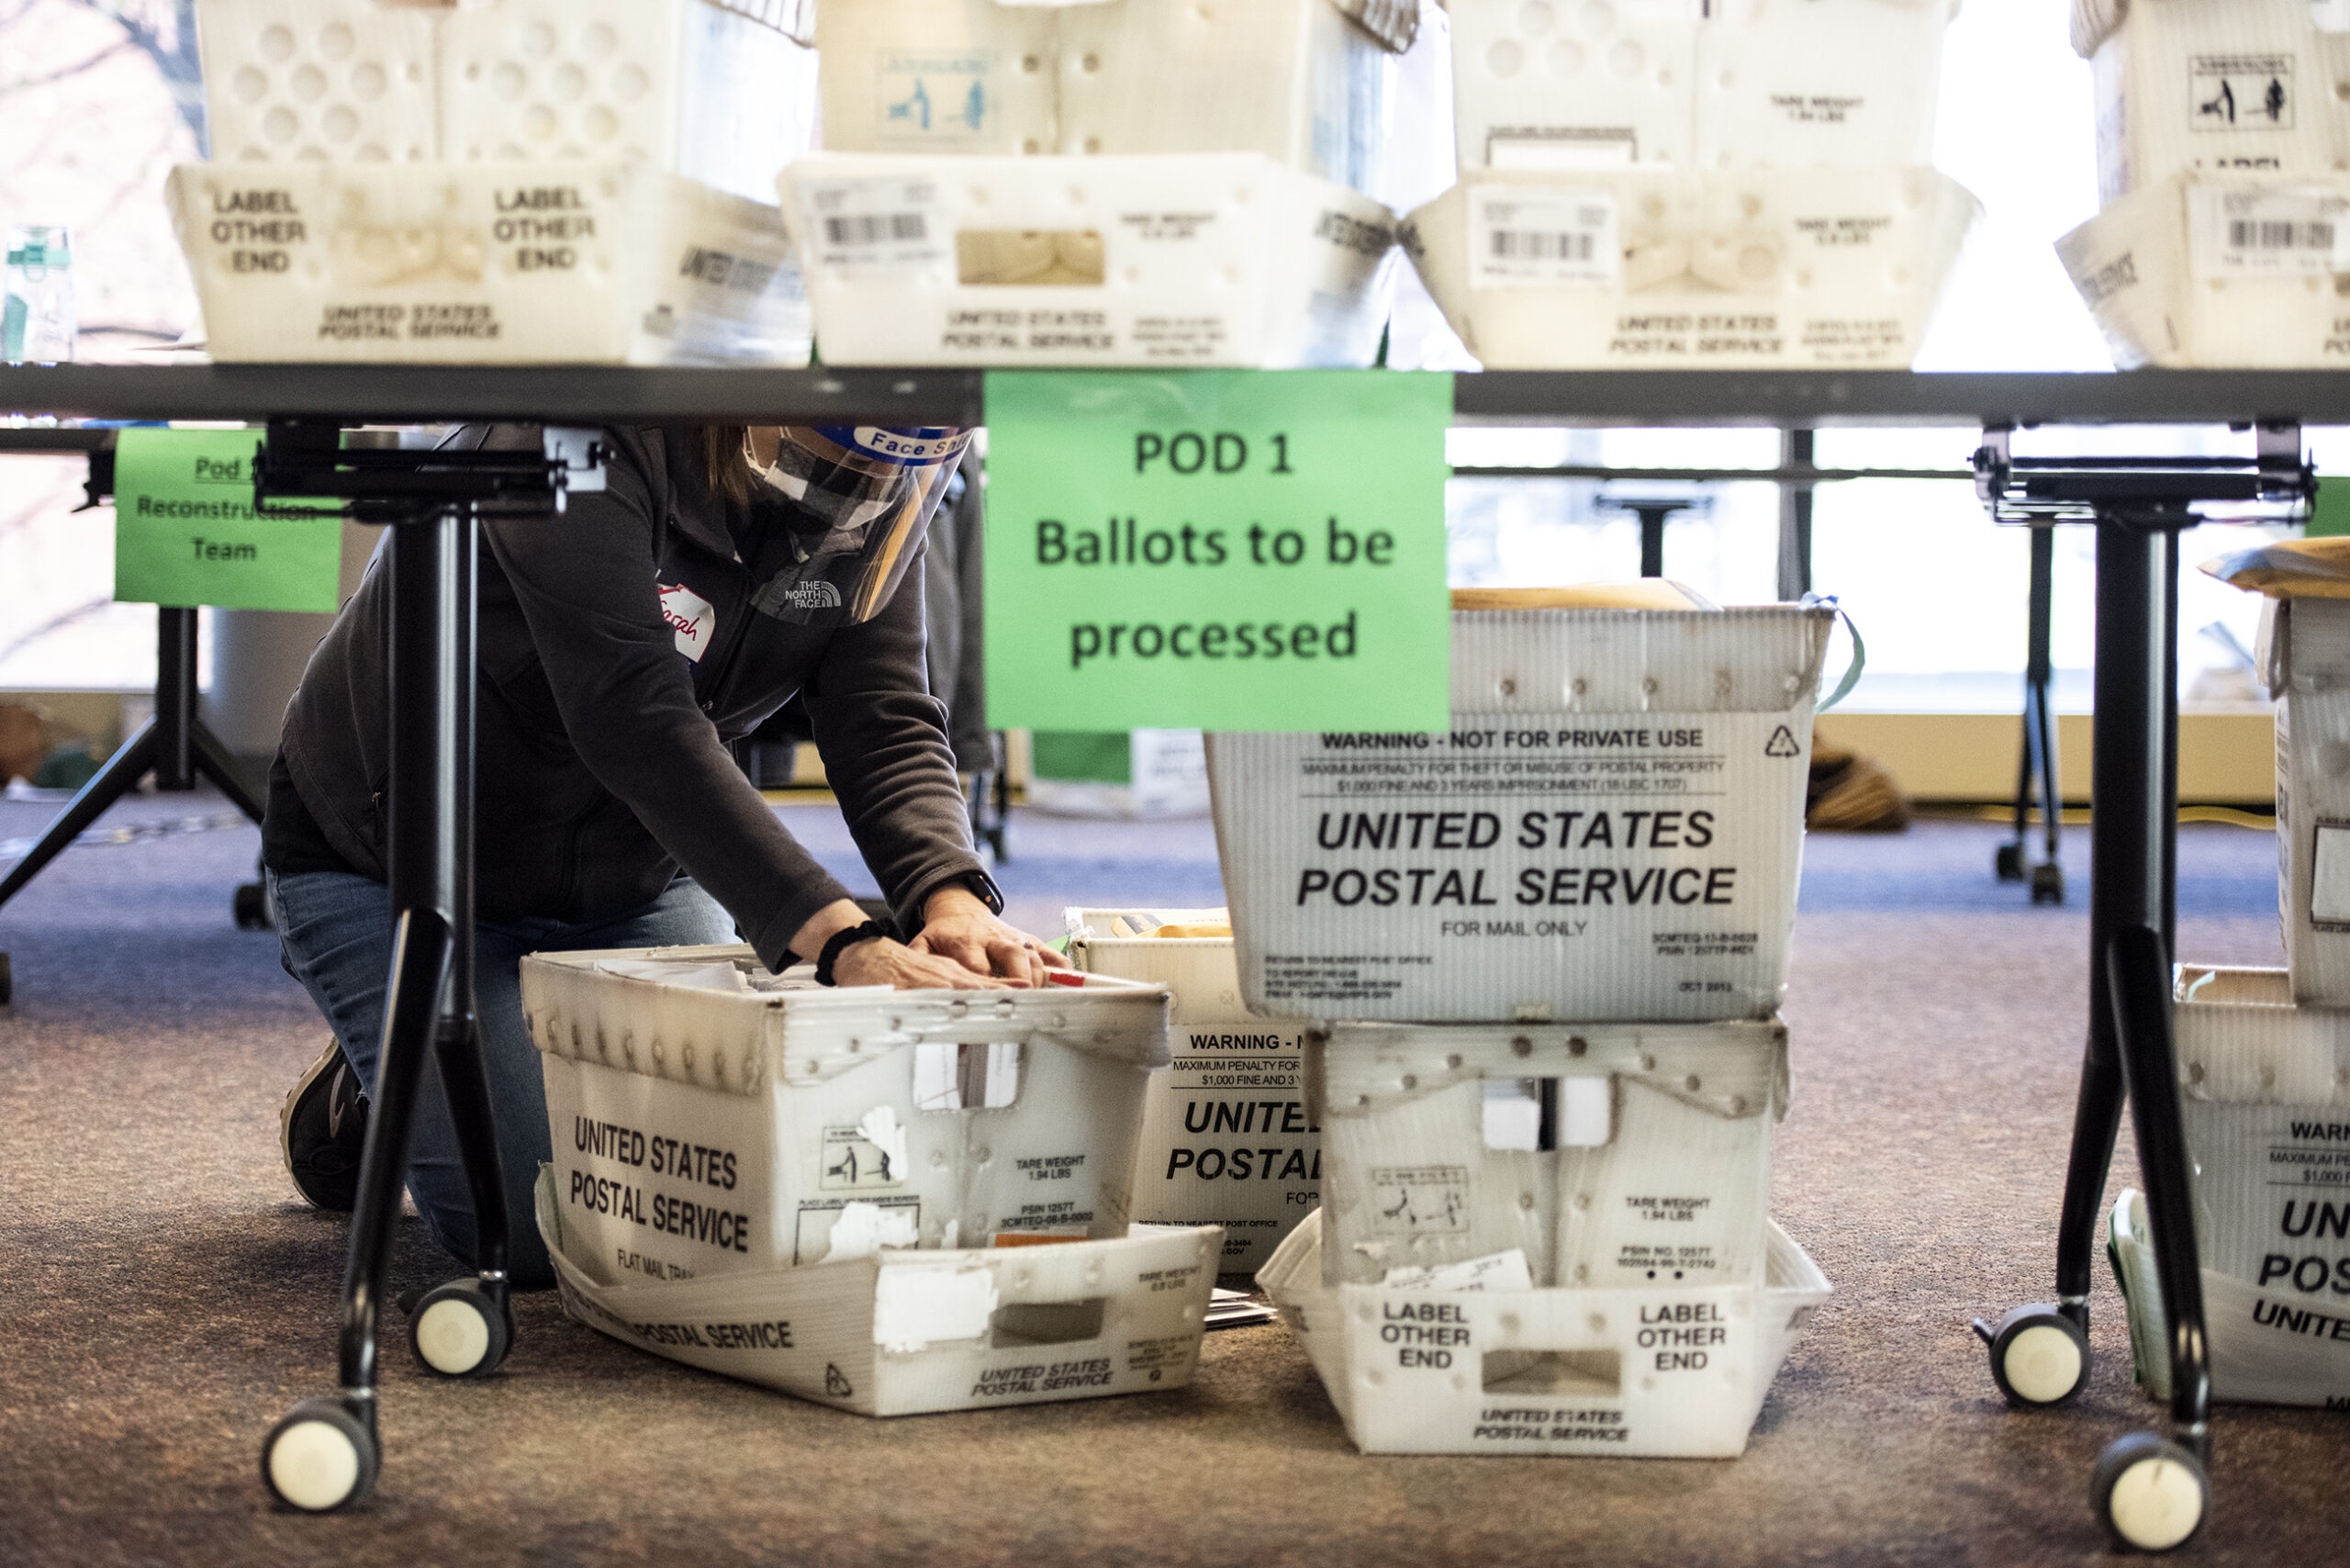 crates of ballots are on the floor and tables as a worker in a face shield flips through them with her hands